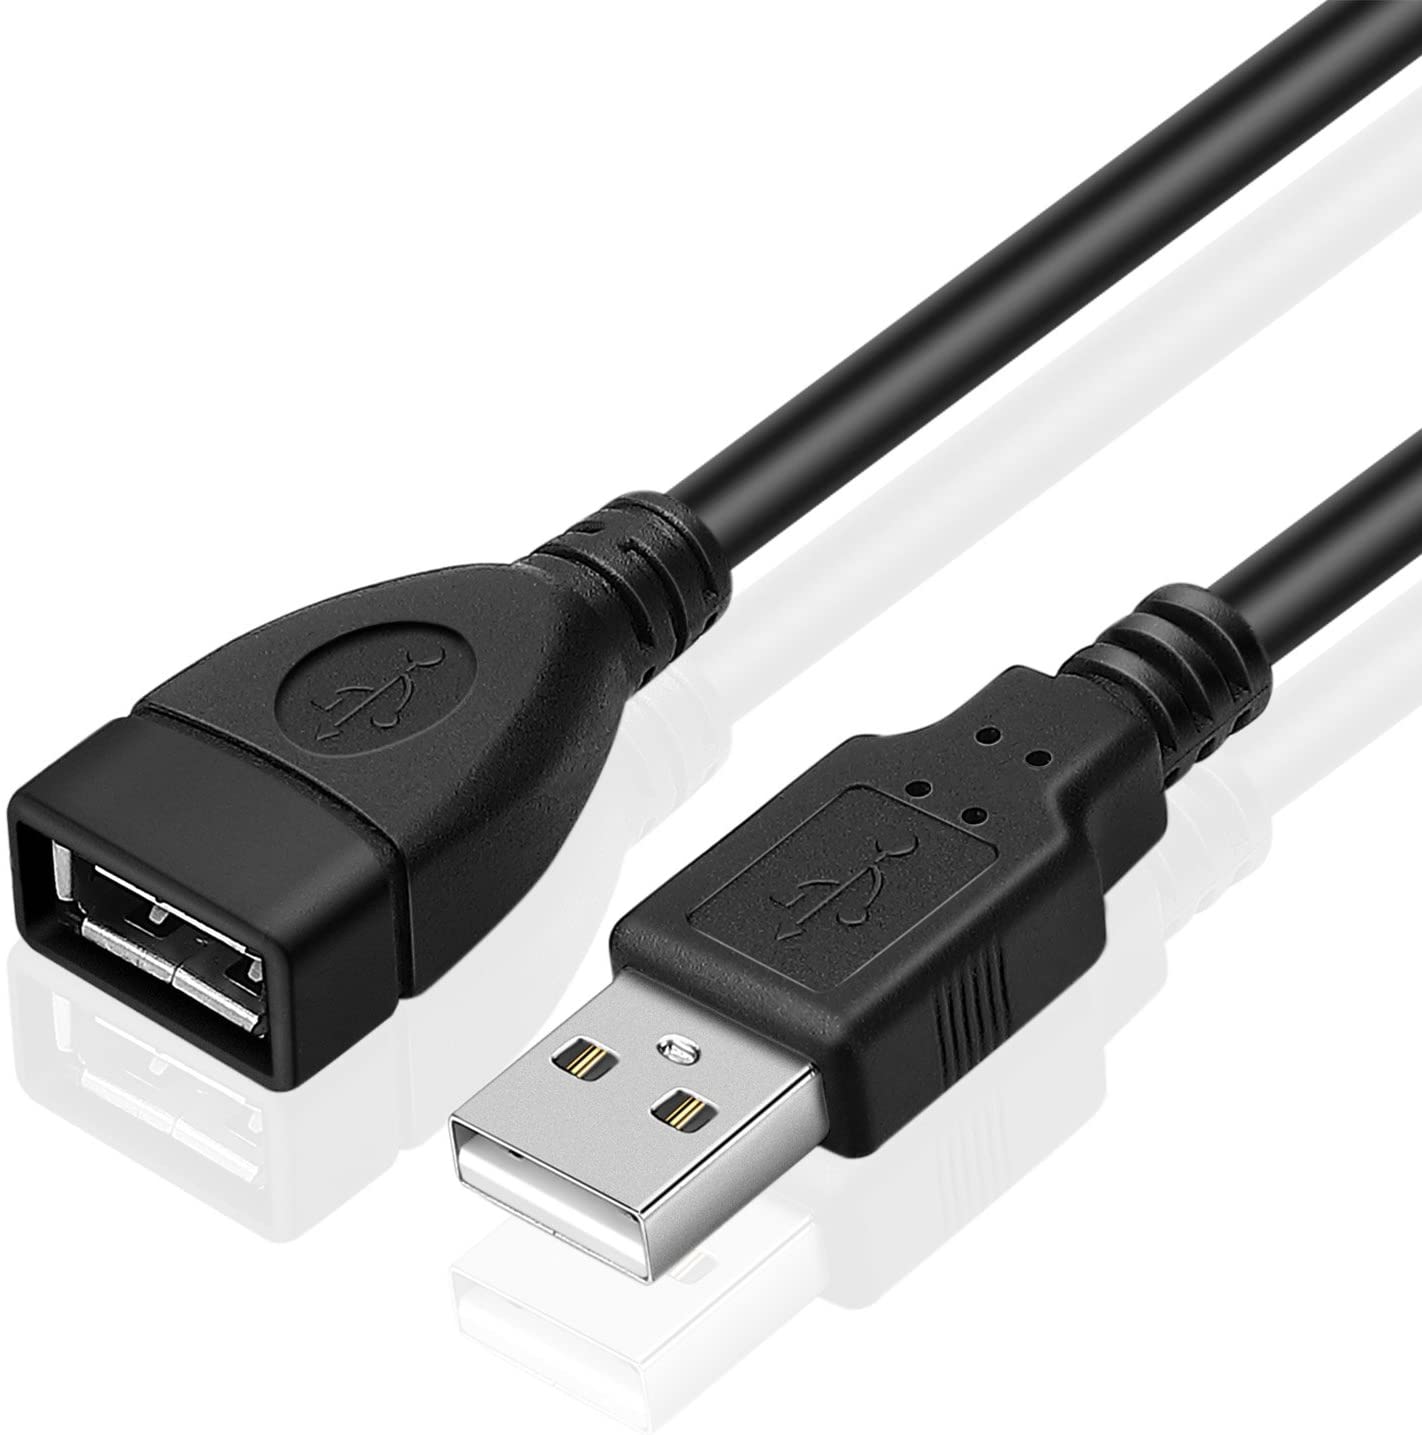 Agiler USB high speed 2.0 extension cable type A(M)/A(F) IN 6 FtFor Sale in Trinidad